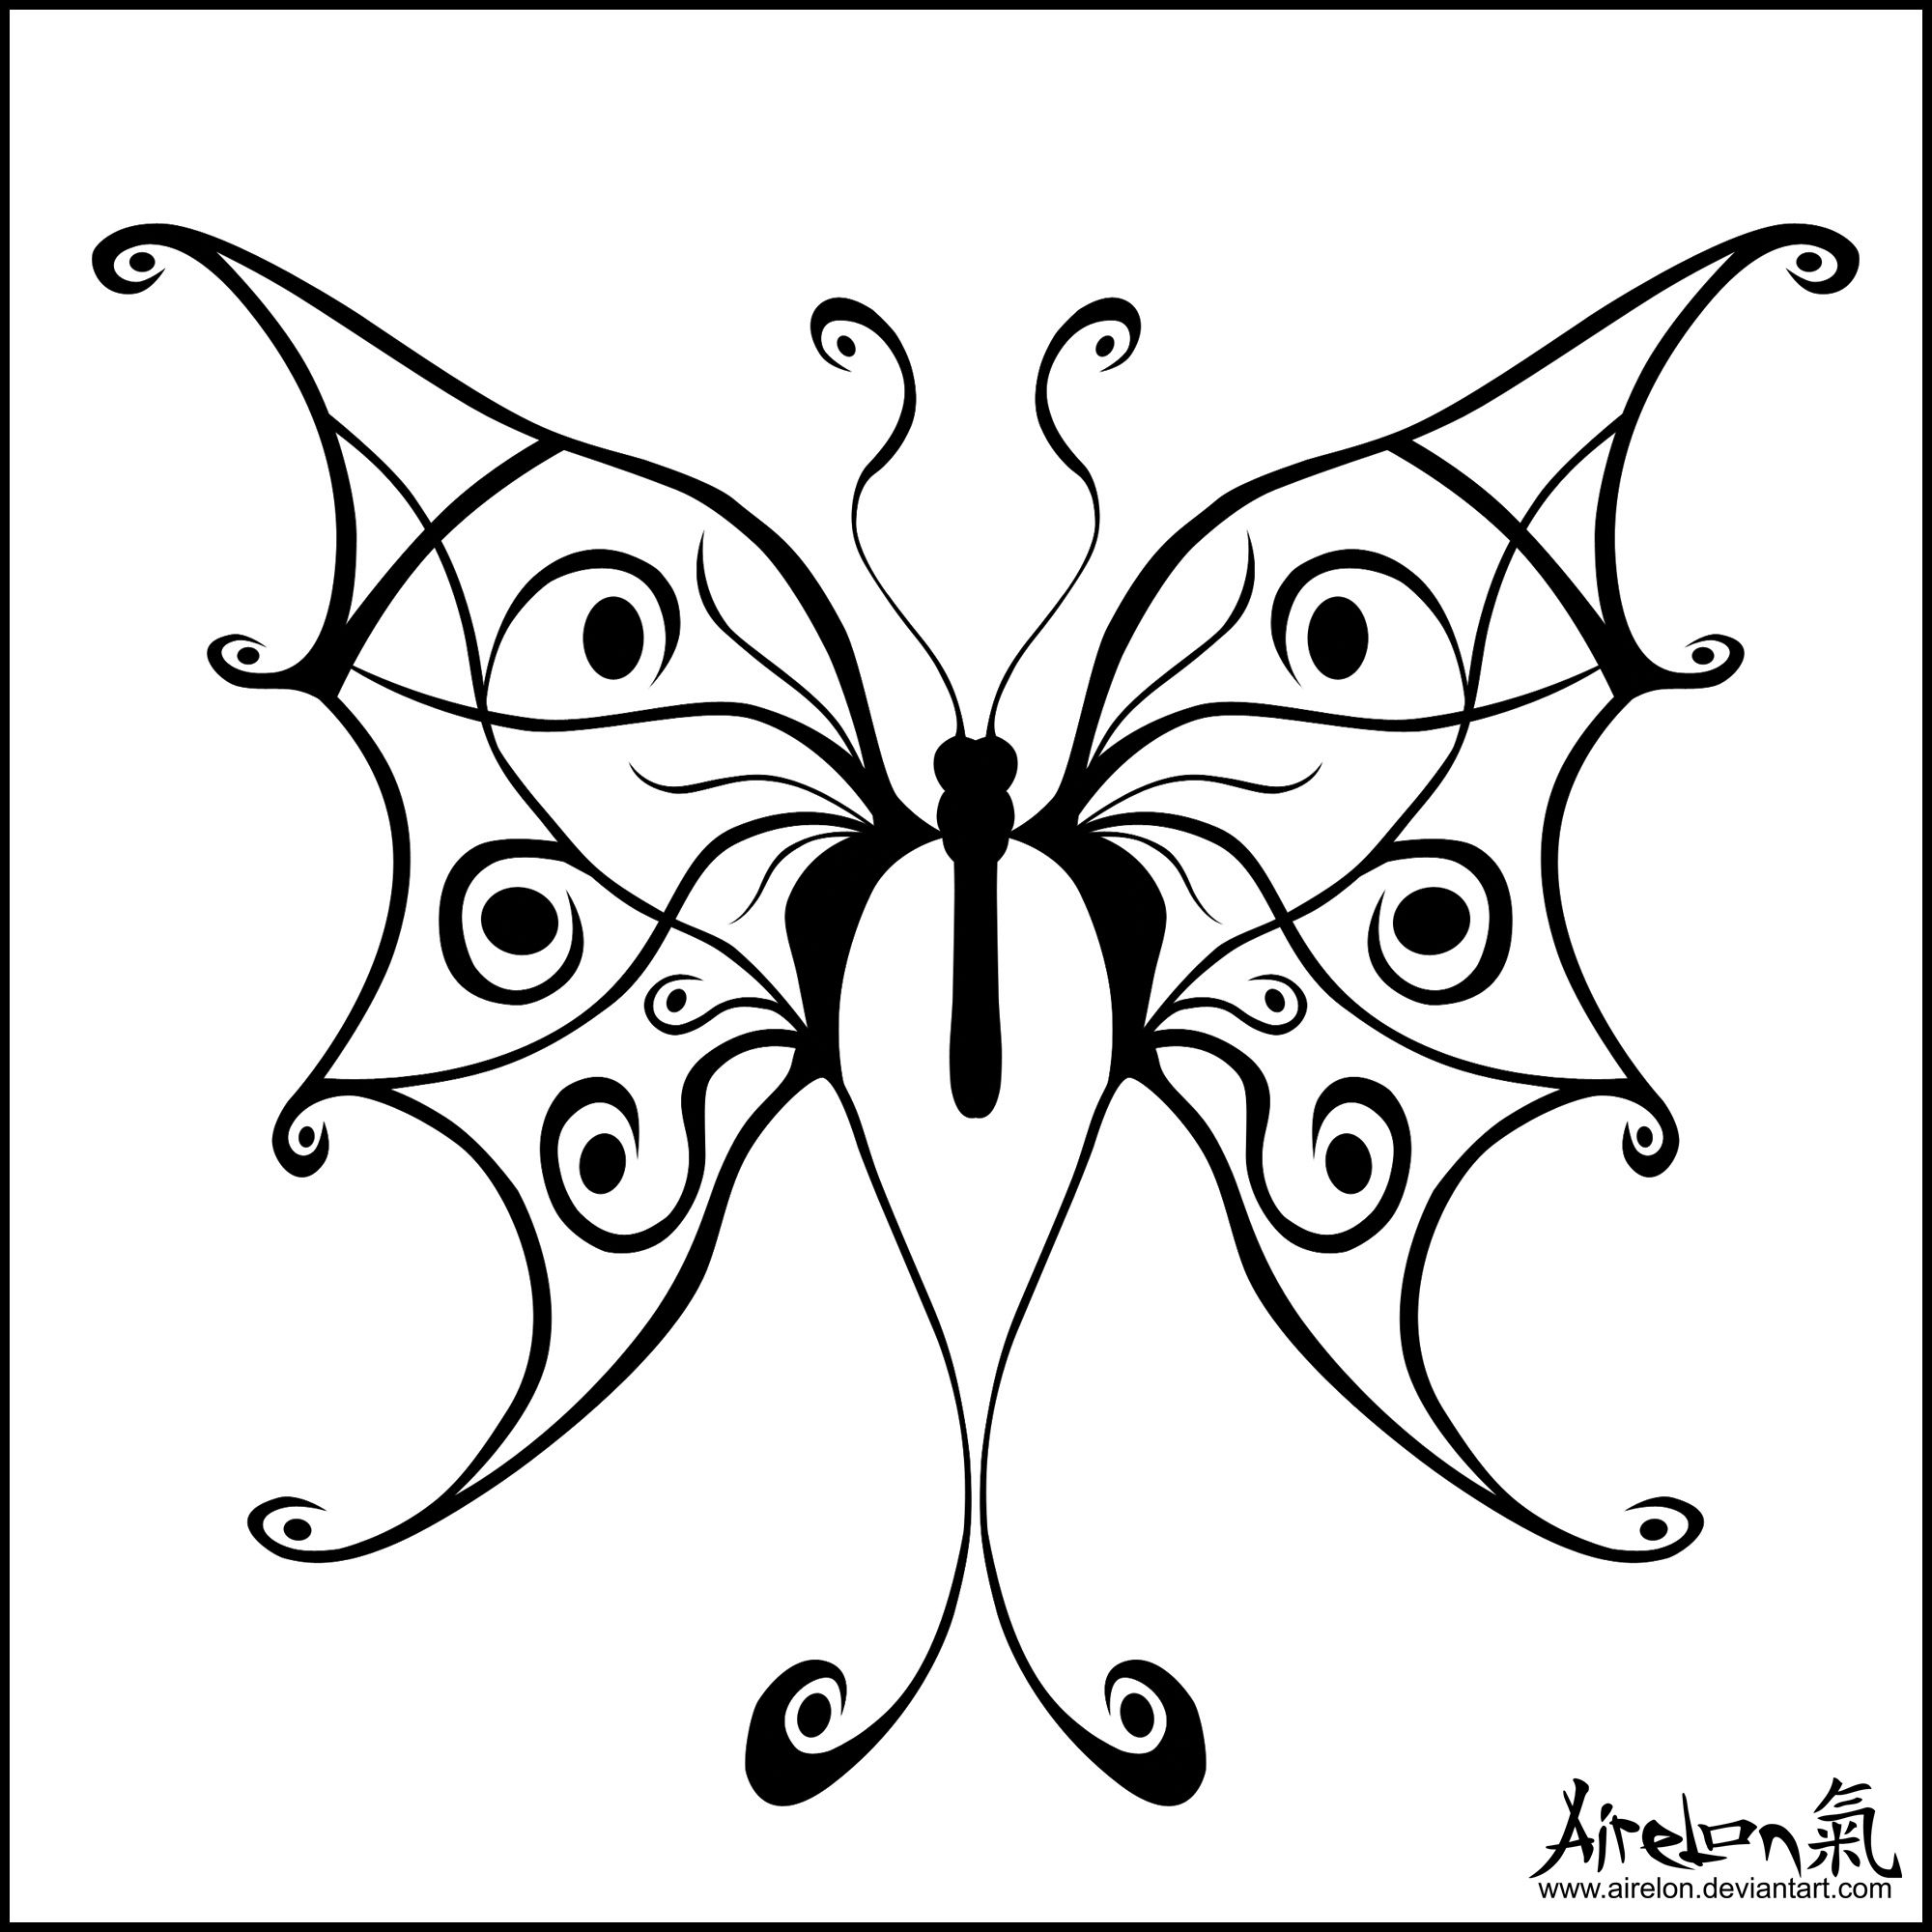 Tribal Butterfly Tattoo Black Airelon On Deviantart Tattoos throughout proportions 2000 X 2000